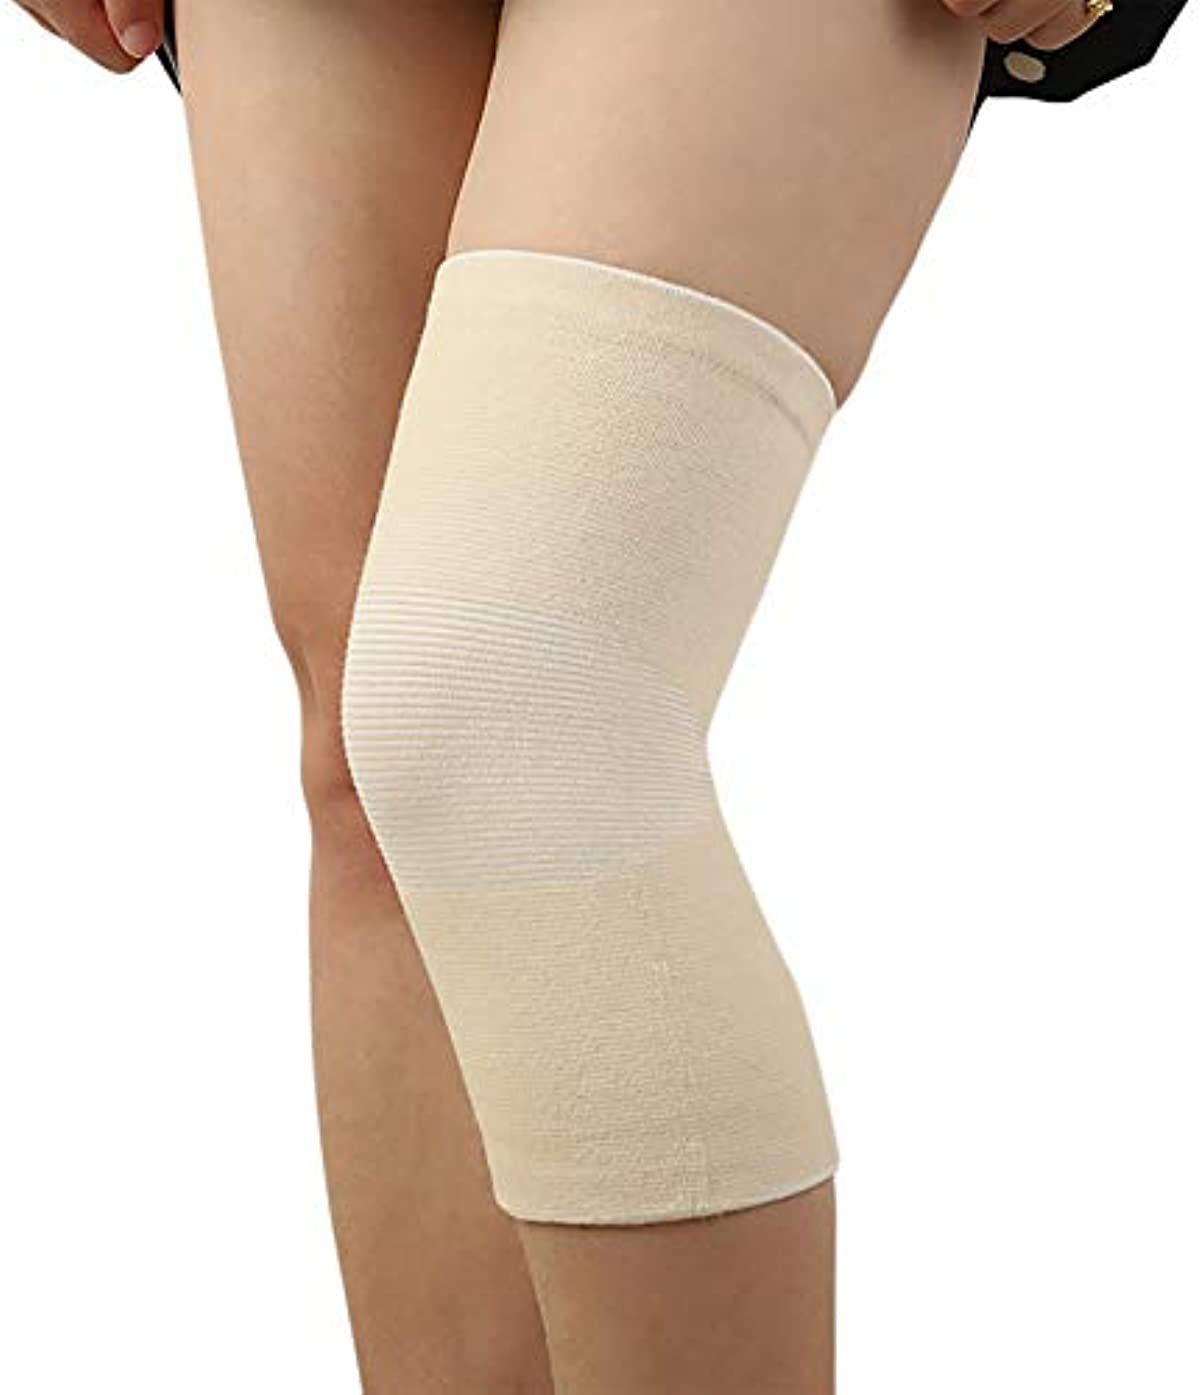 (One Pair) Bamboo Fabric Knee Sleeves for Knee Support, Circulation Improvement & Pain Relief,Sport Compression for Running, Pain Management, Arthritis Pain Women & Men (Complexion, Small)